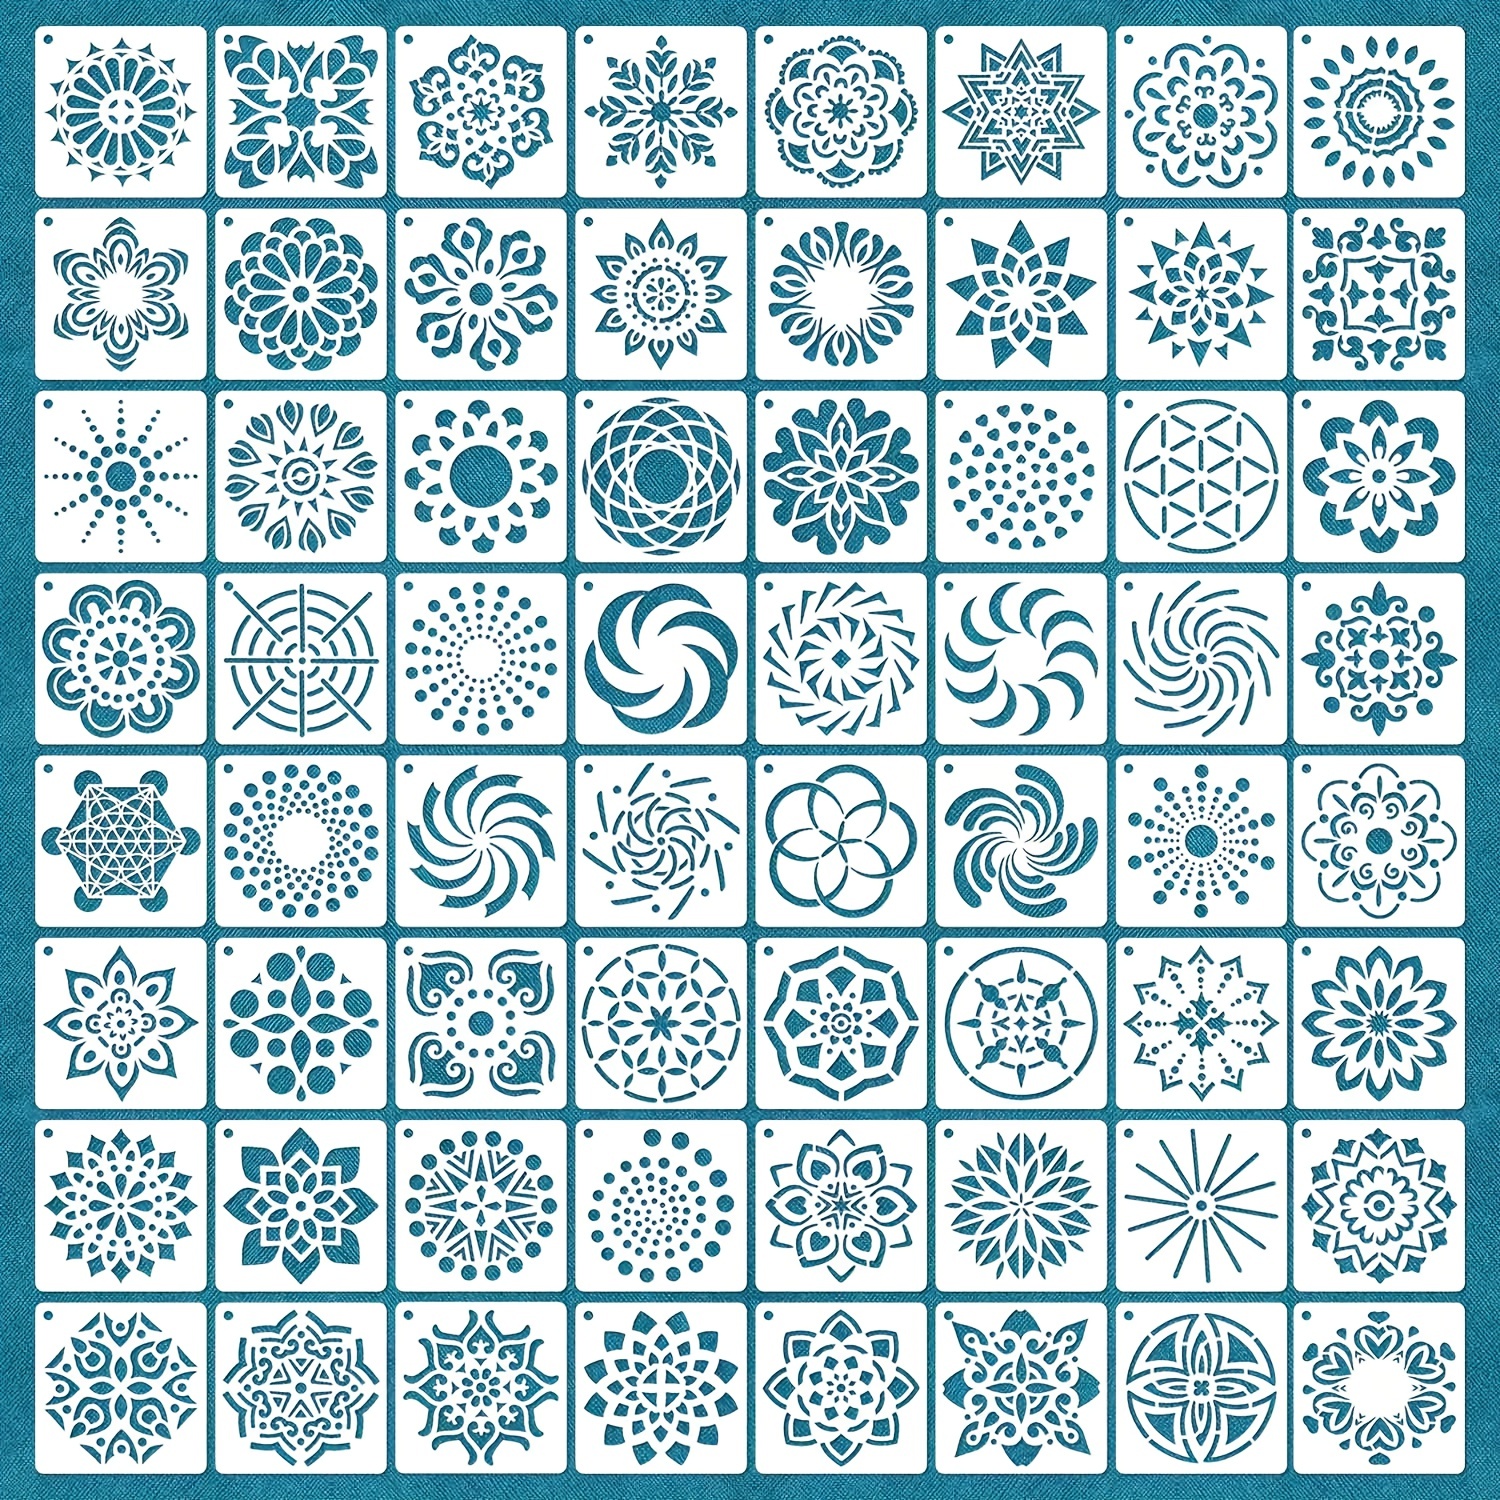 

64 Pieces Stencils For Painting, Small Reusable Mandala Dot Stencil, Art Craft Template For Painting On Wood, Wall, Fabric, Rock, Chalkboard, Sign, Diy Art Scrapbook Projects Eid Al-adha Mubarak